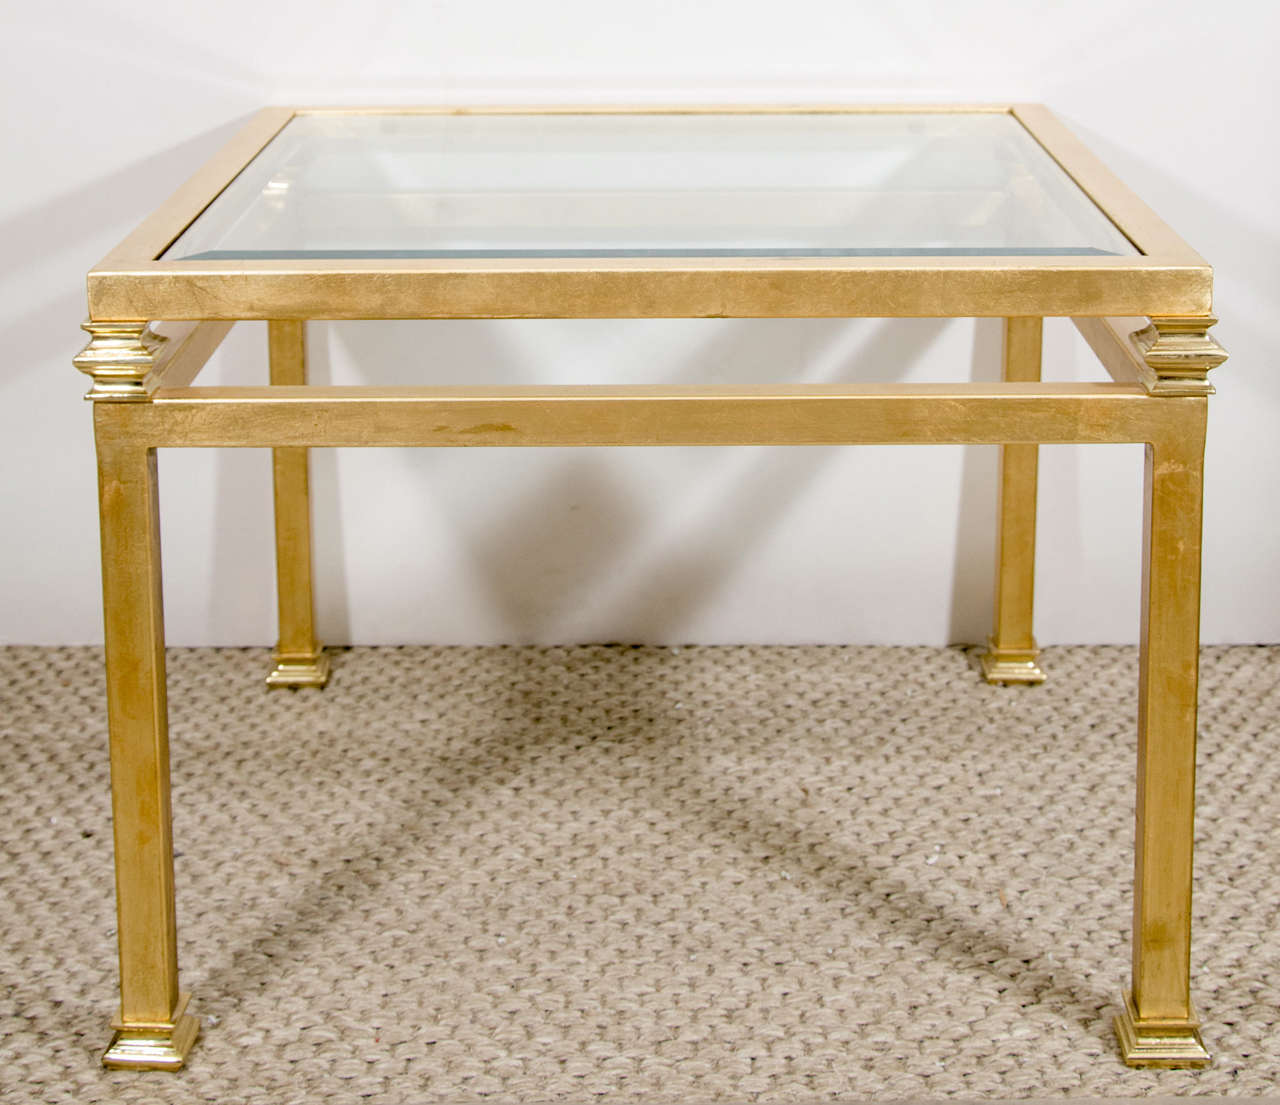 A very striking pair of gilt iron side tables with lovely detail on the legs and beveled glass top. France, circa 1960s.